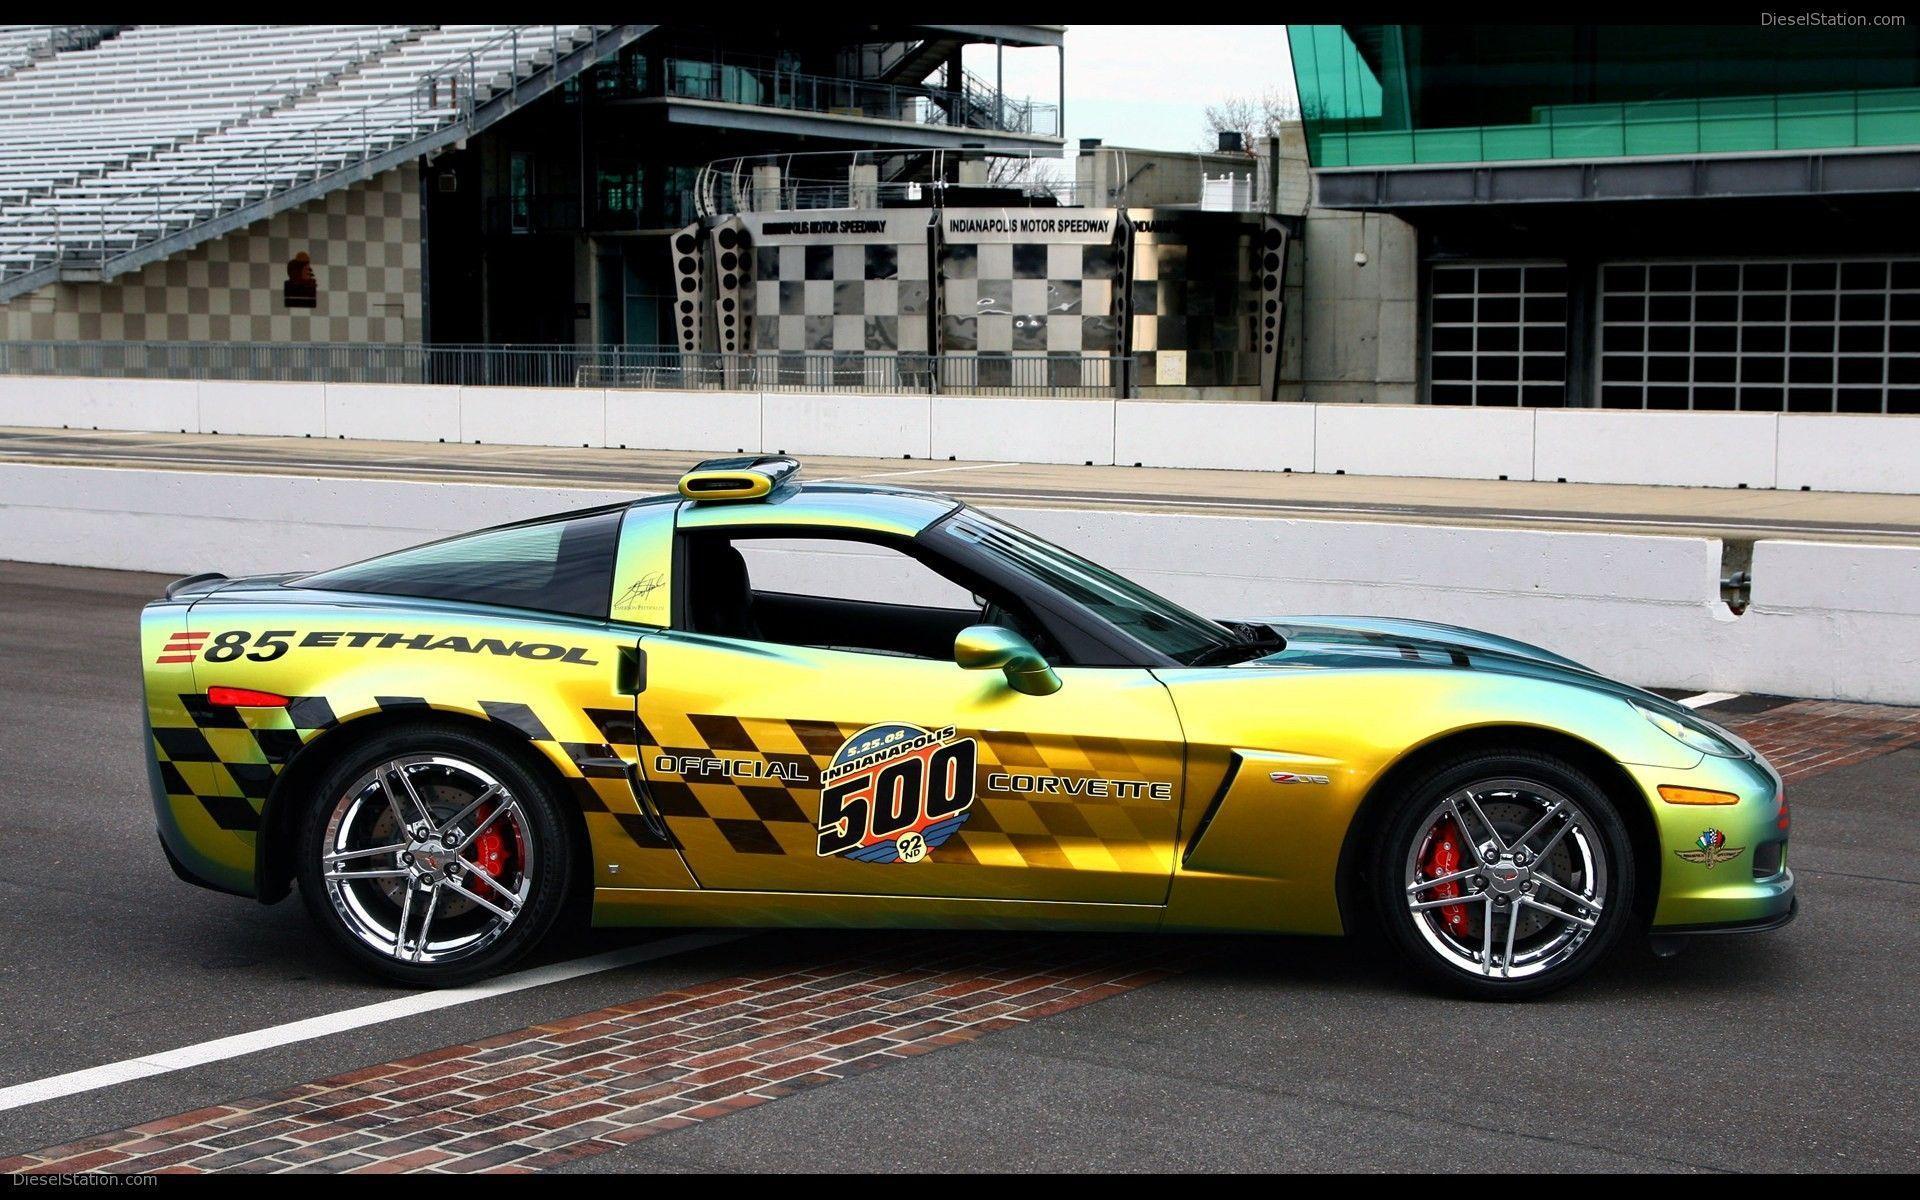 Chevrolet Corvette Indy 500 Pace Cars (2008) Widescreen Exotic Car